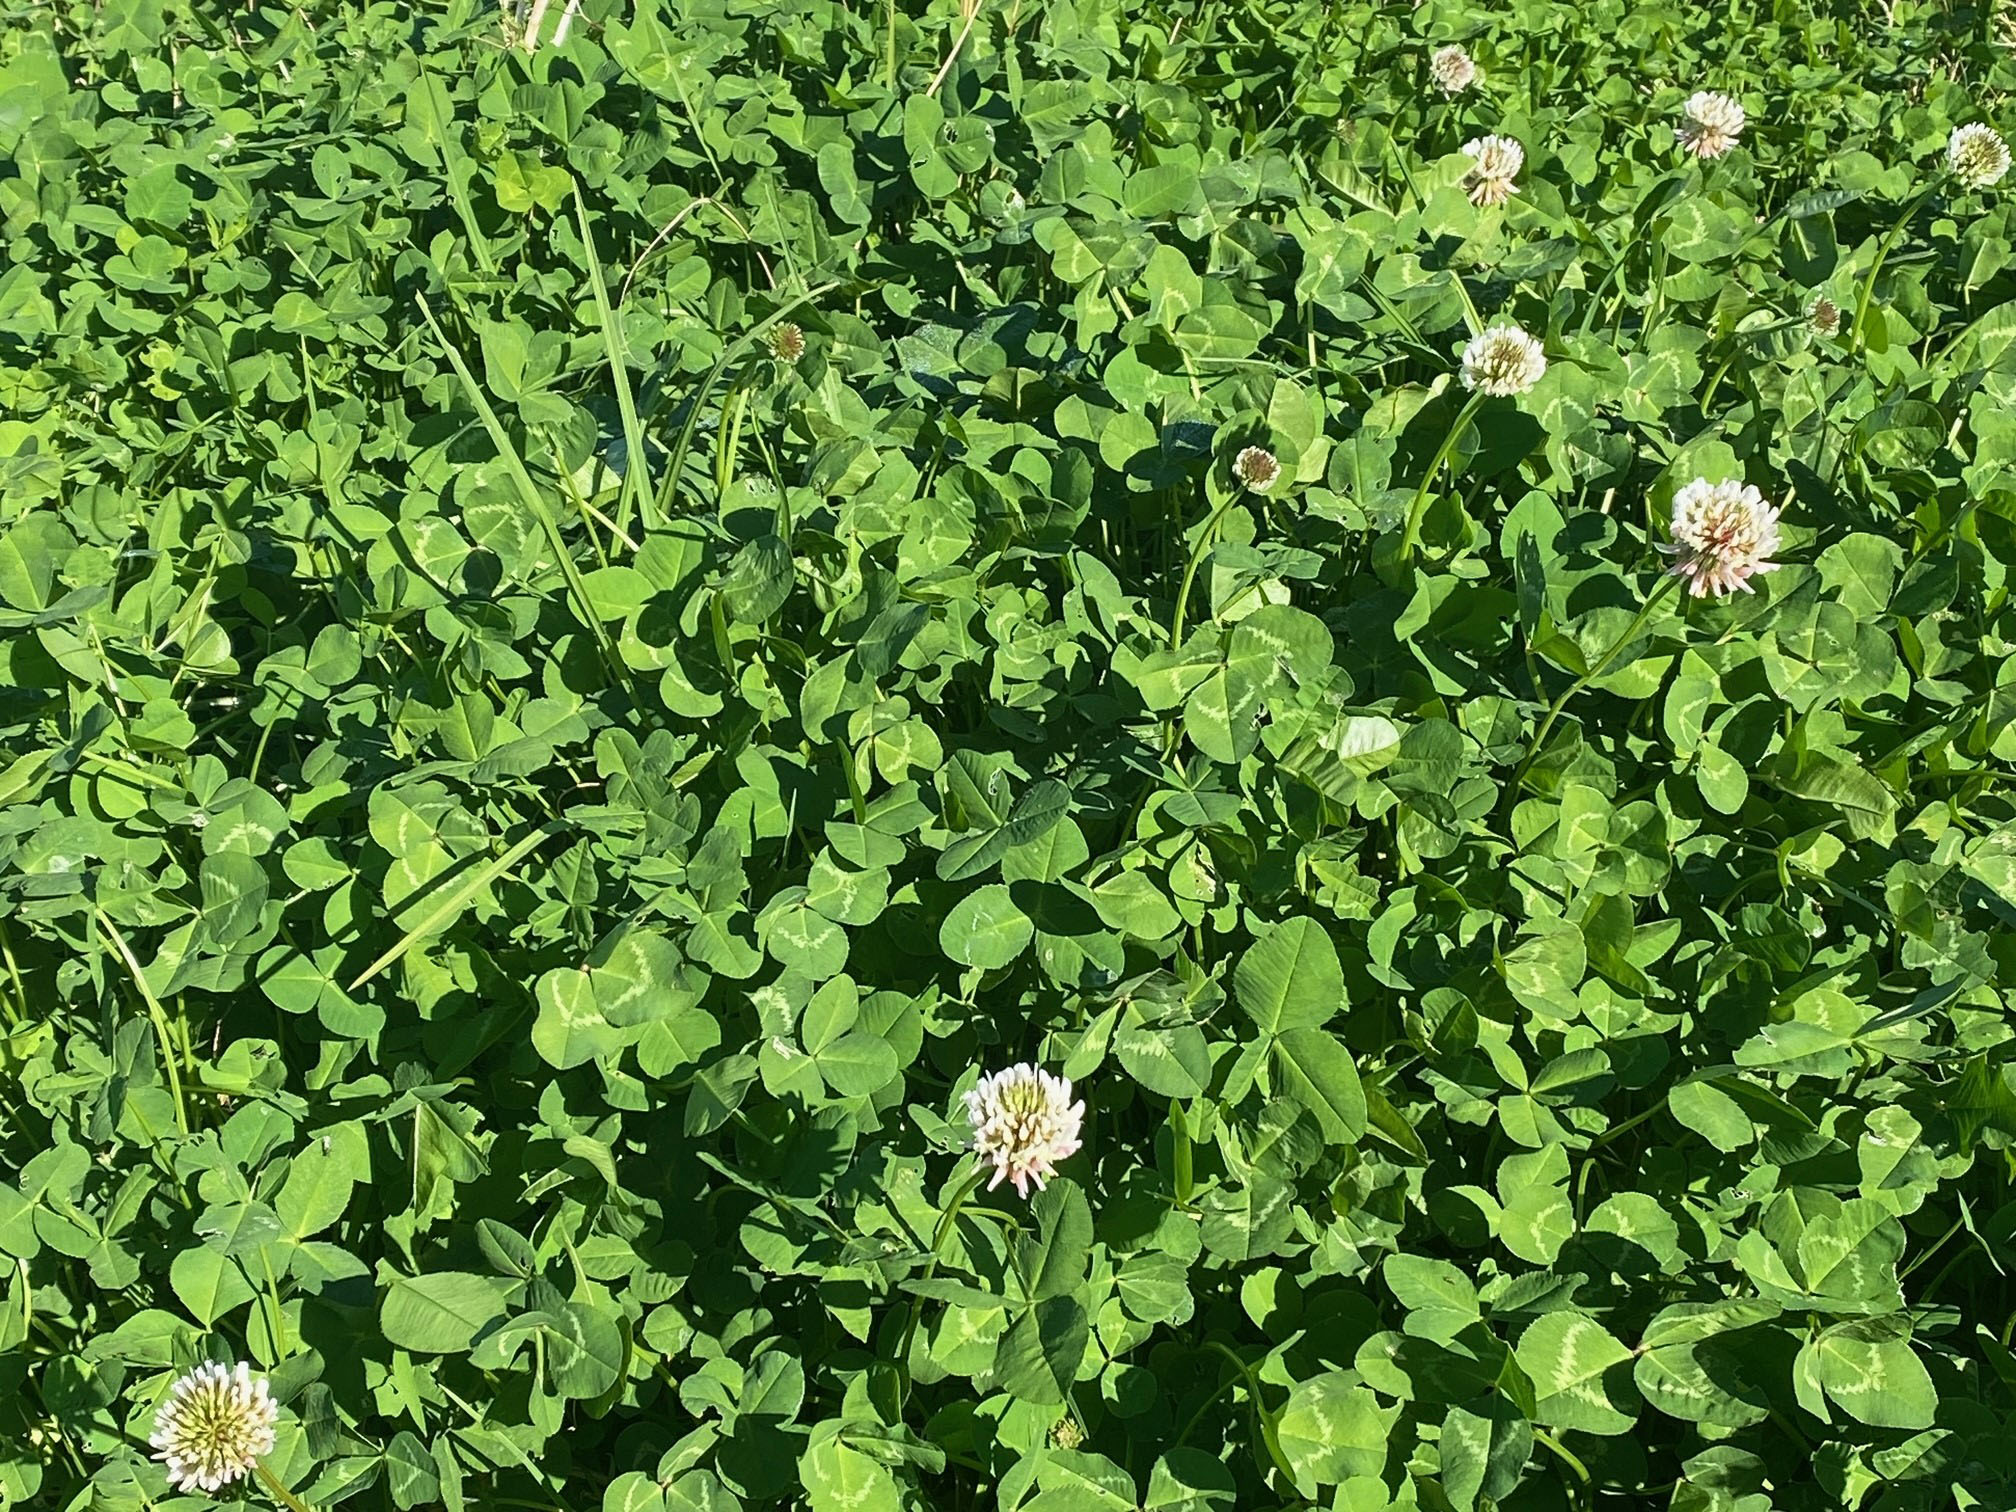 Clover can cause bloat